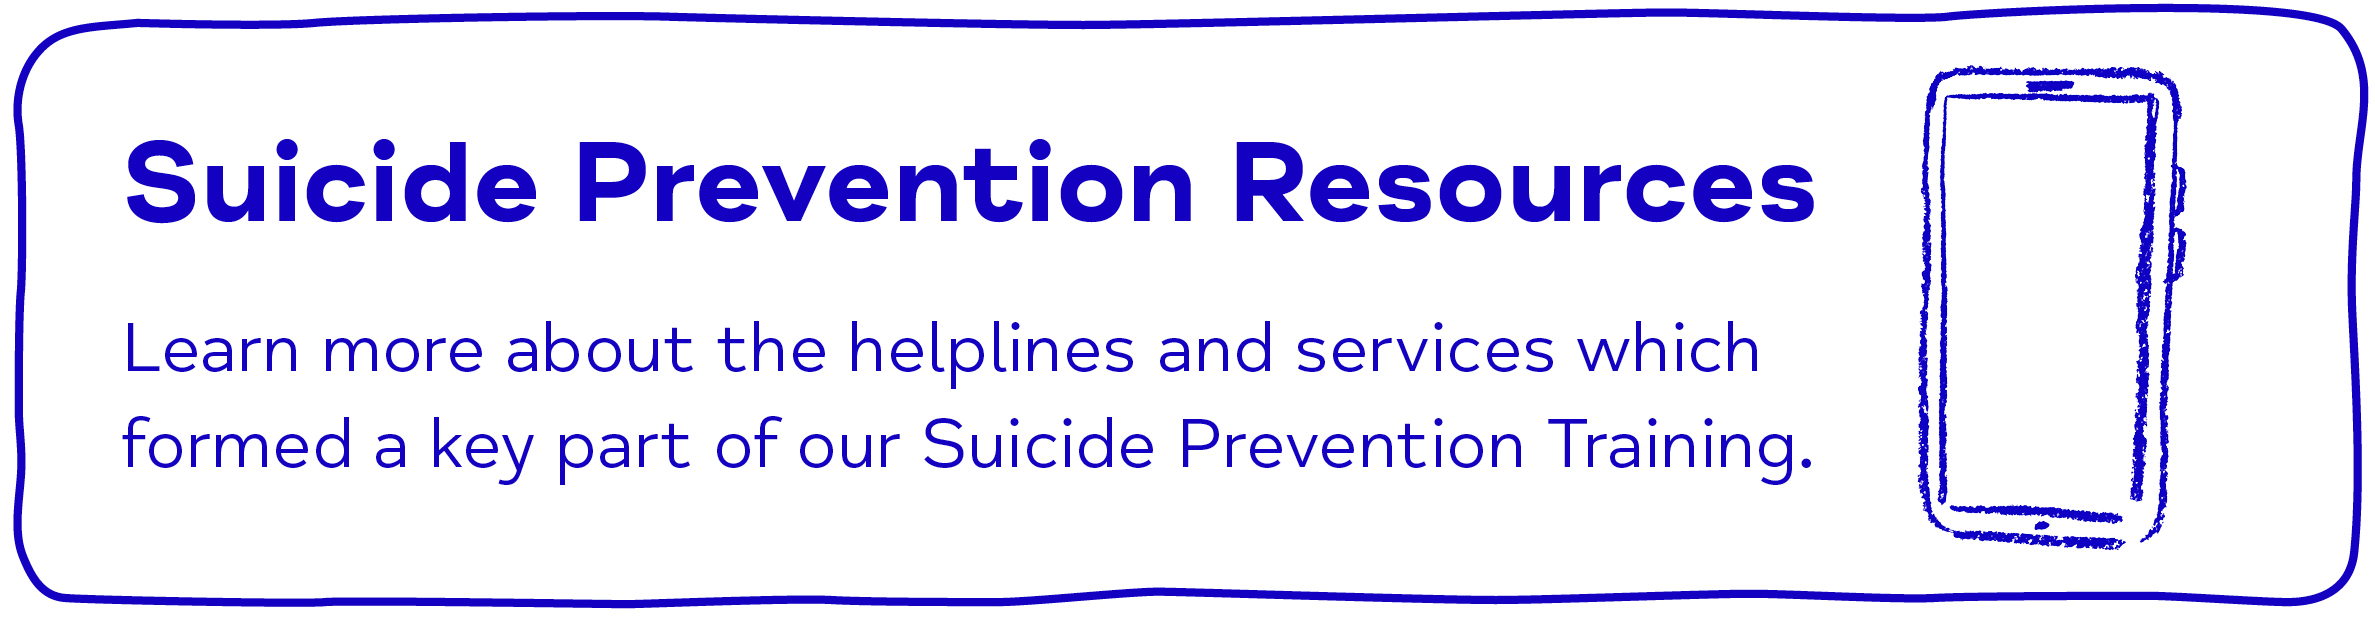 Suicide Prevention Resources Learn more about the helplines and services which formed a key part of our Suicide Prevention Training.